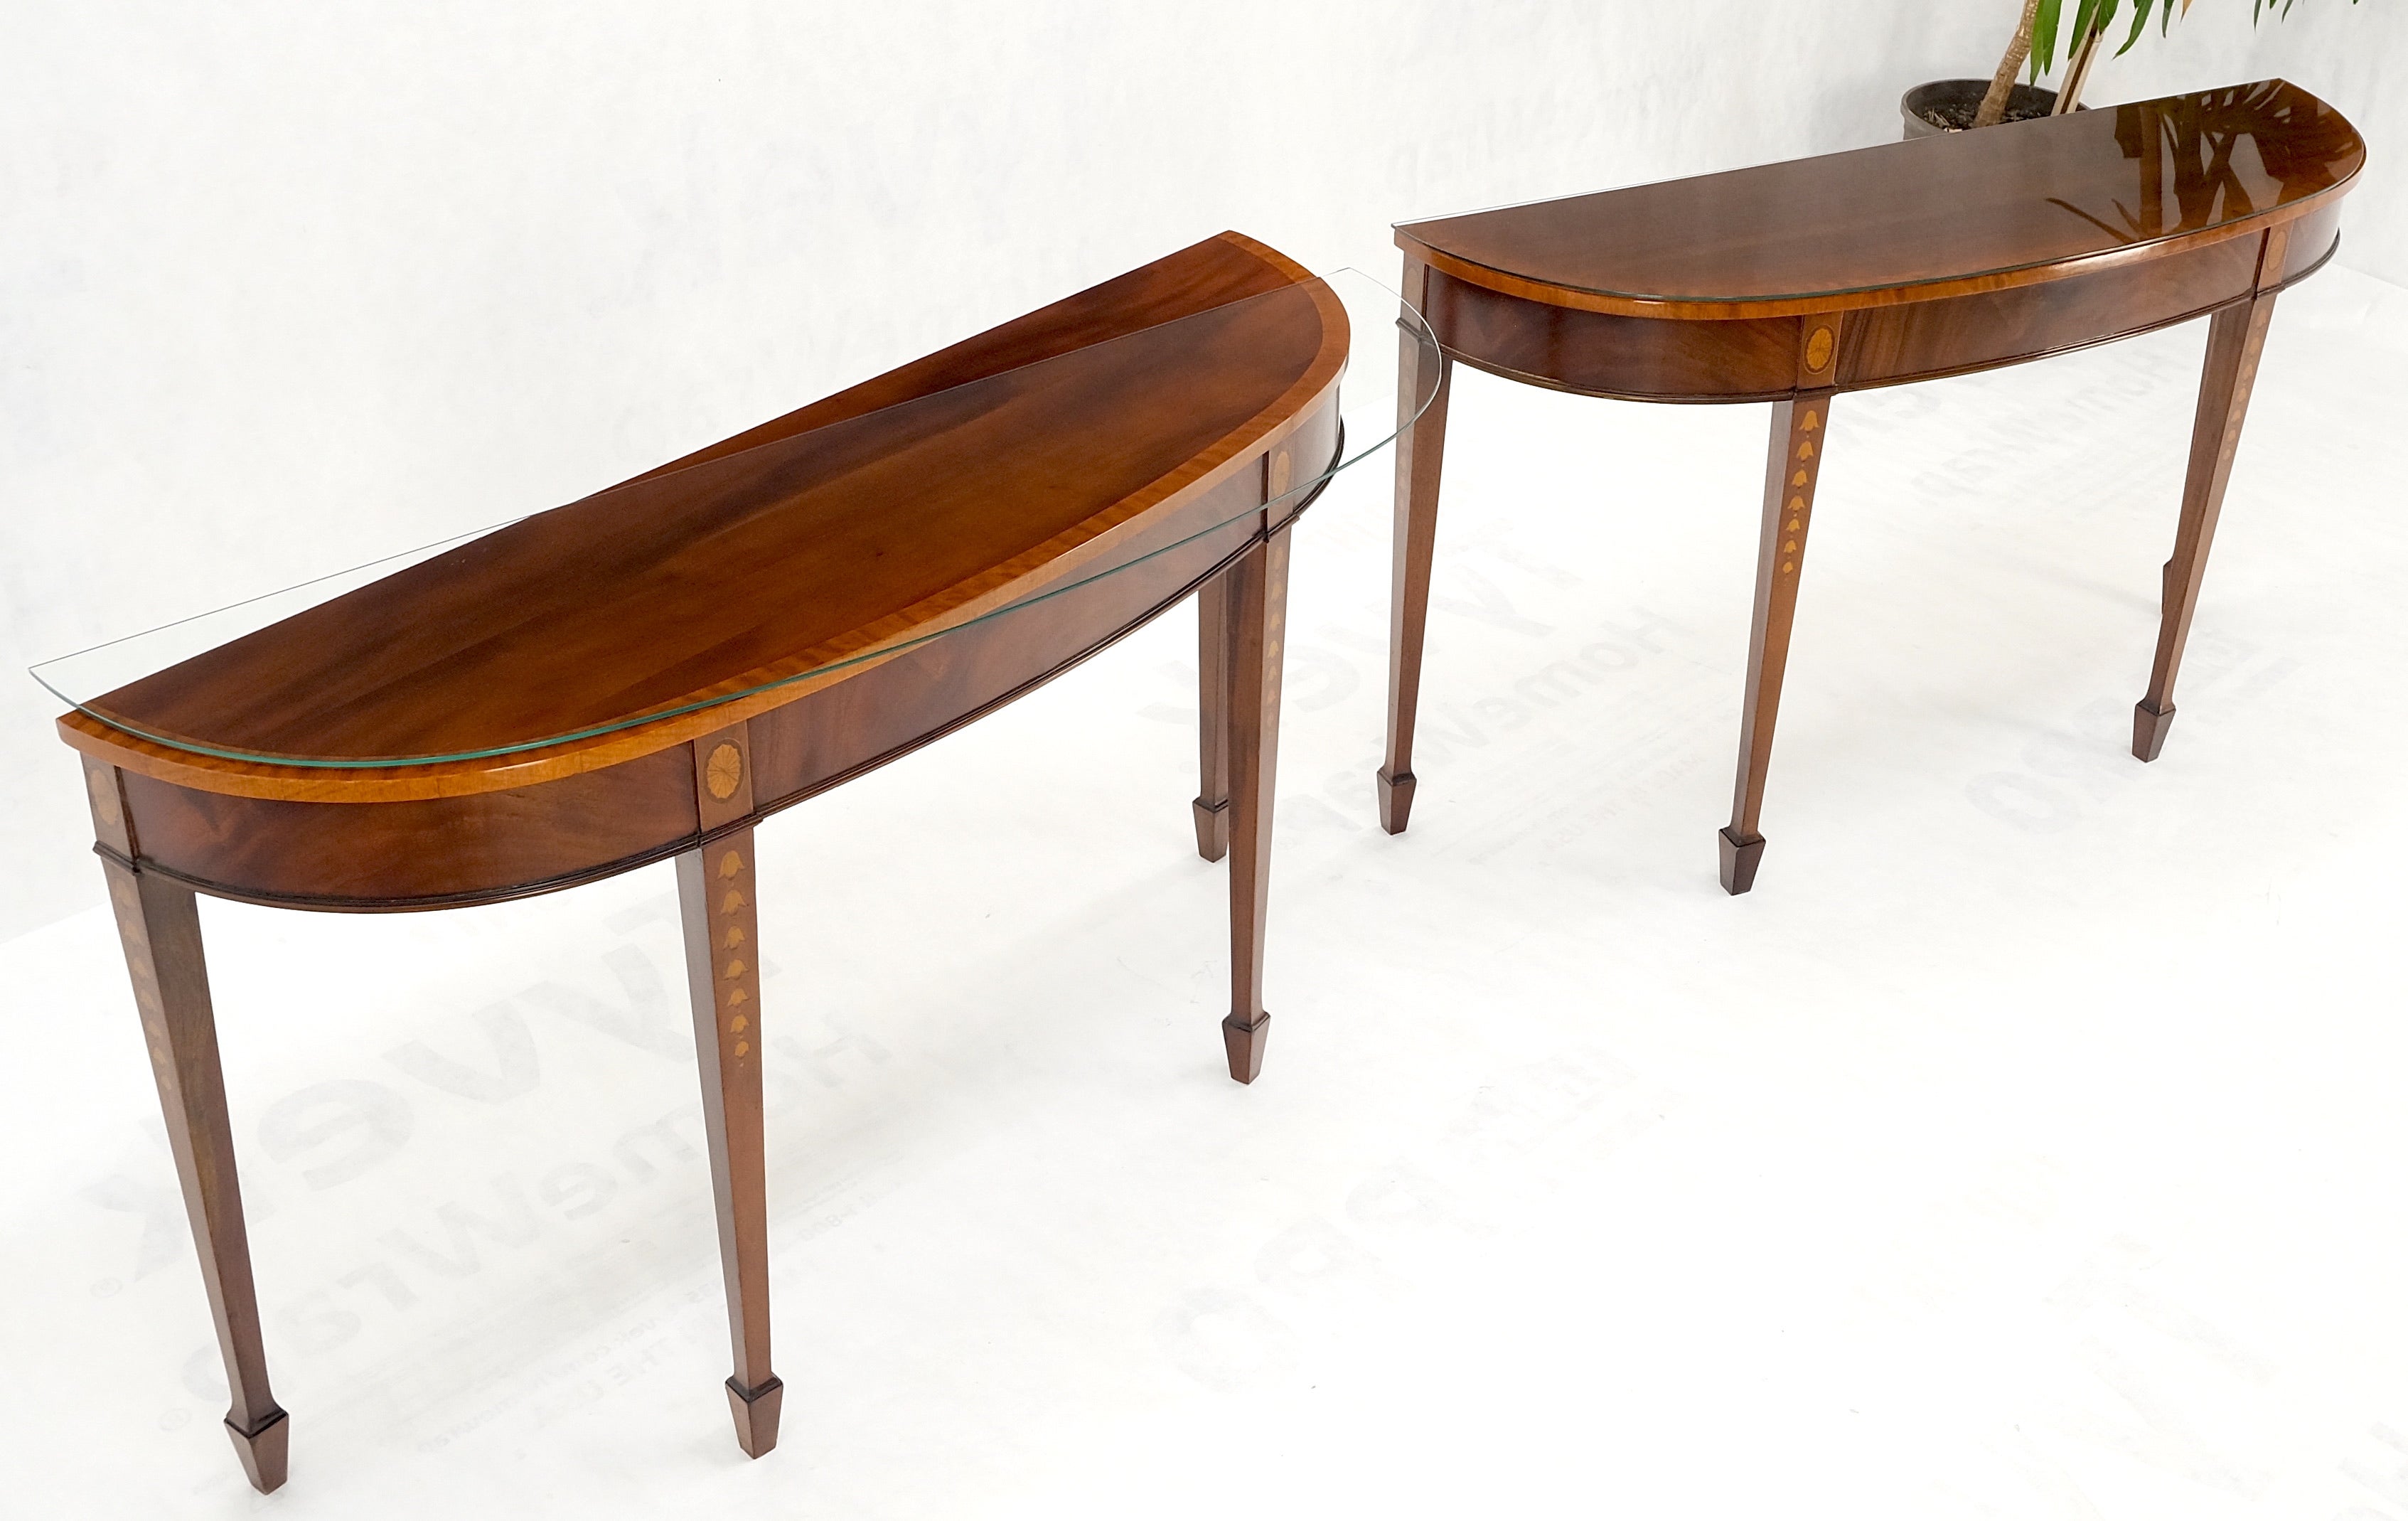 Pair of Mahogany Demi Lune Banded Inlayed glass tops console sofa tables MINT!
comes with glass tops.